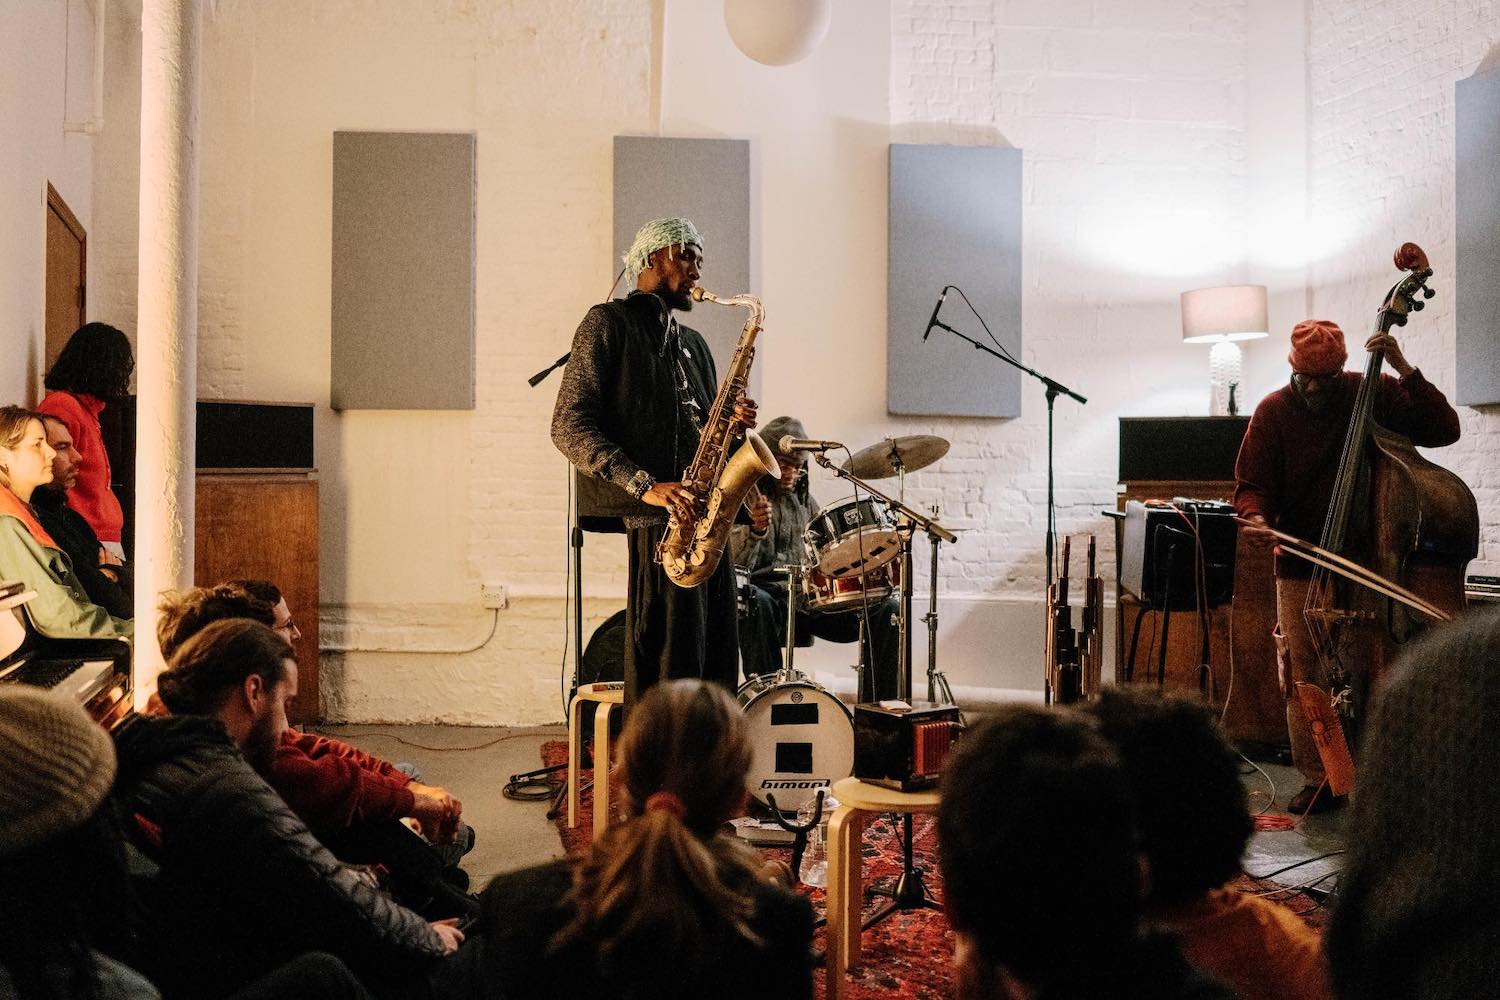 A group of musicians perform at Blank Forms while audience members sit on a carpet and watch.